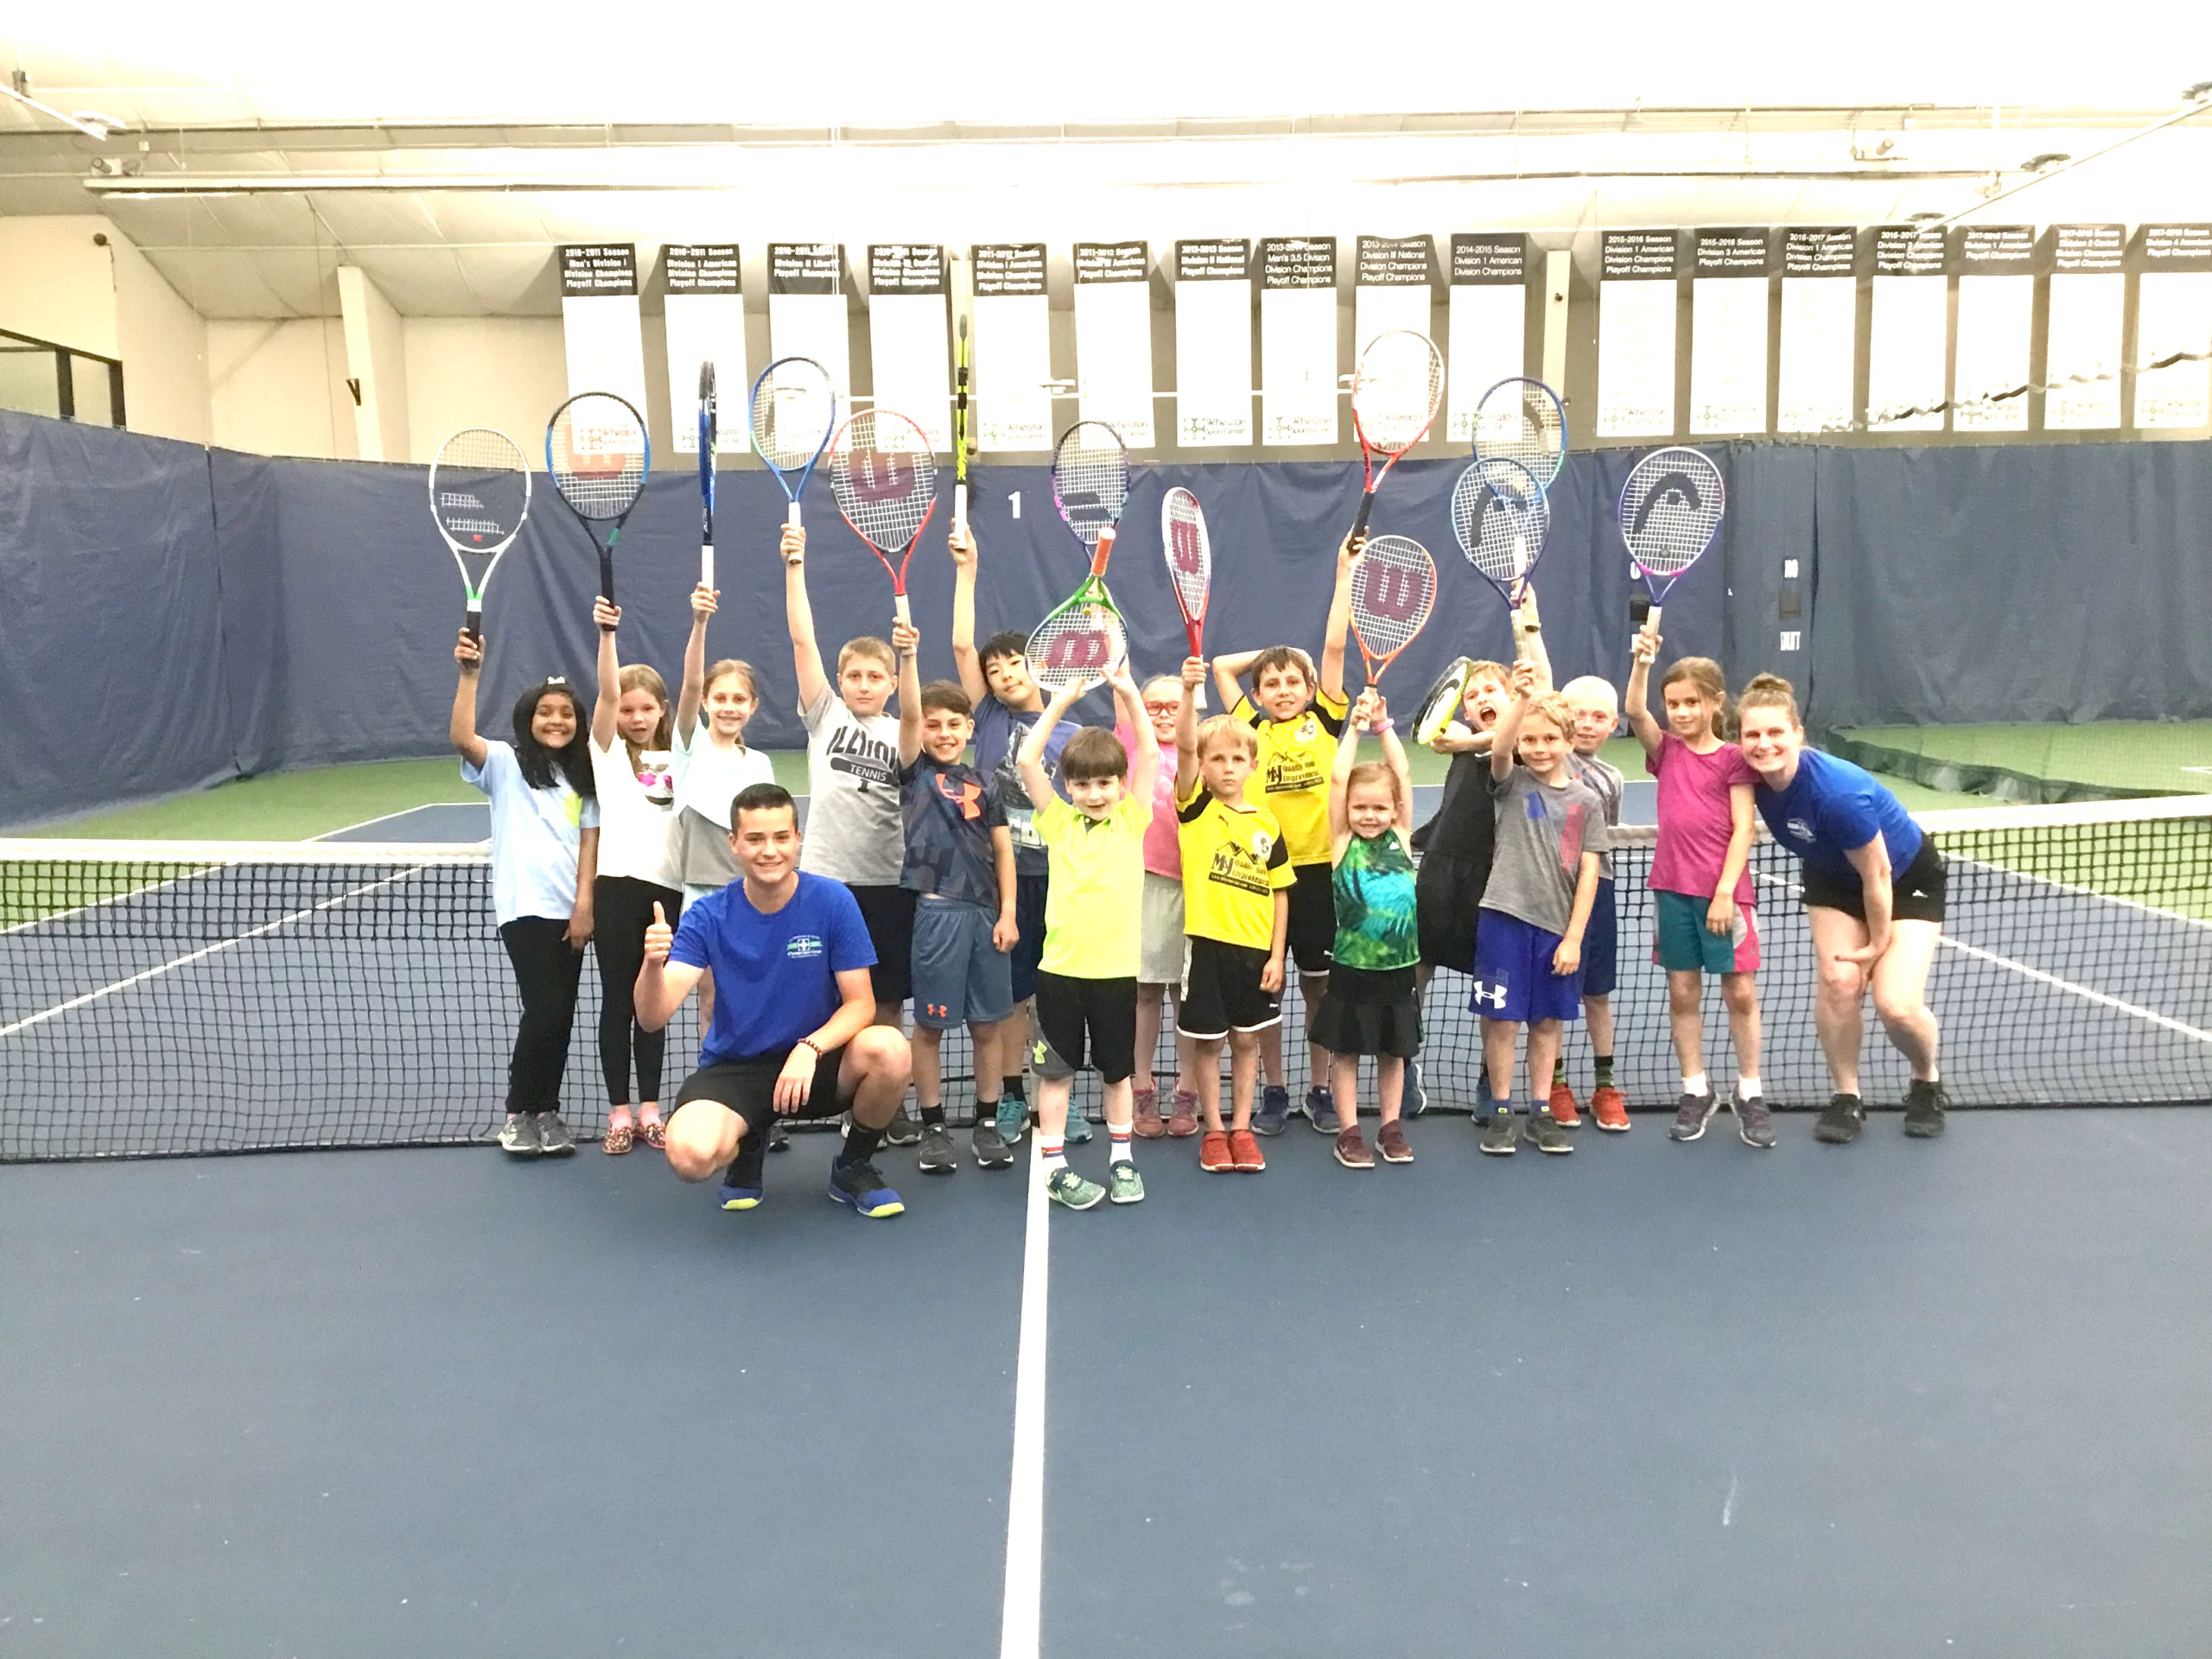 Wheaton Sport Center kids on tennis court holding up their rackets at Tennis Evolution Camp